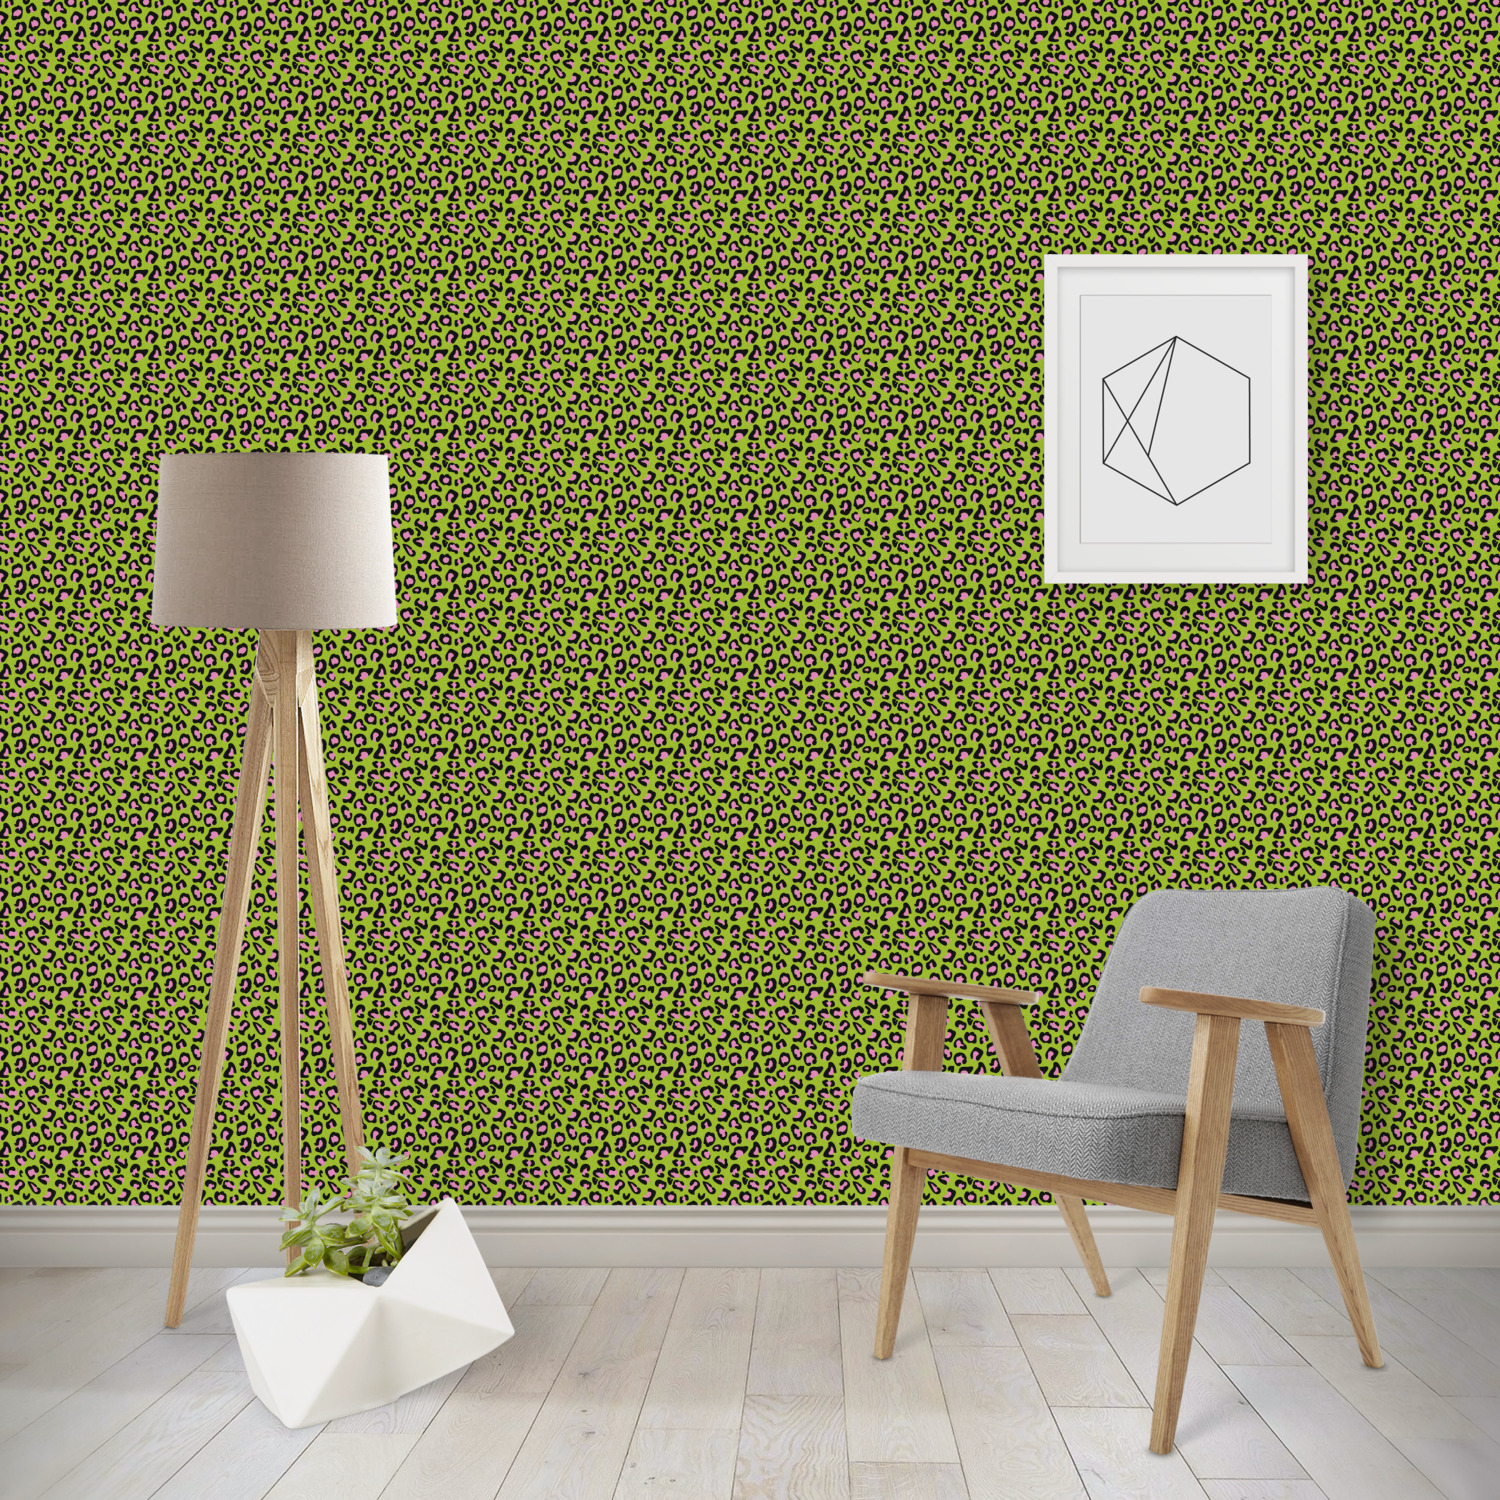 Pink & Lime Green Leopard Wallpaper & Surface Covering - YouCustomizeIt